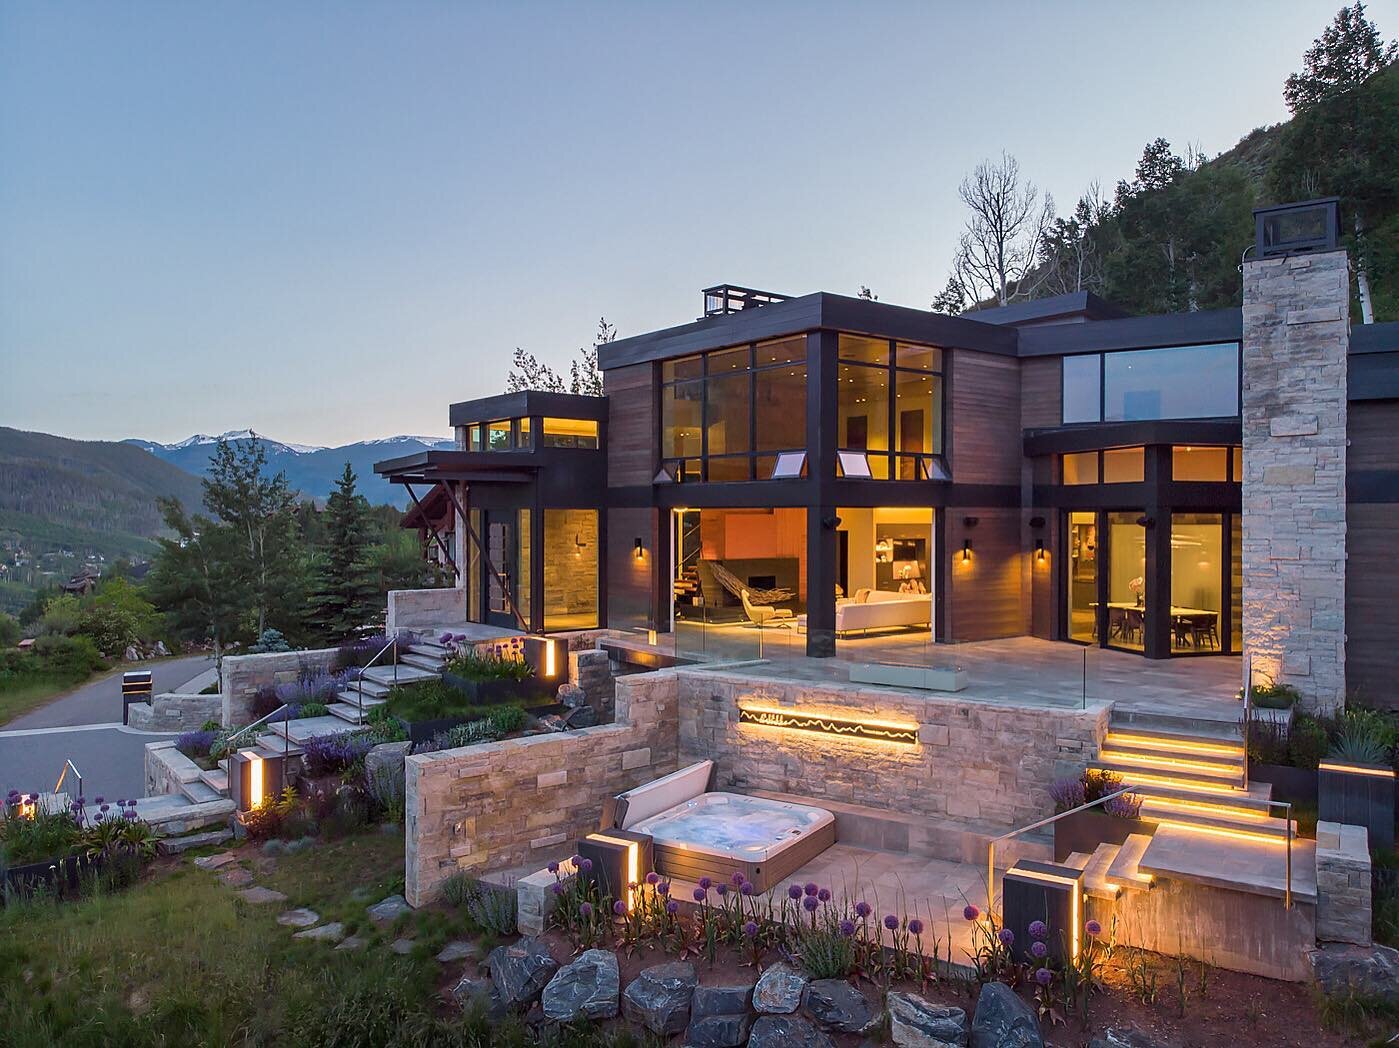 An incredible modern home I had the opportunity to photograph while working with @vailcustom